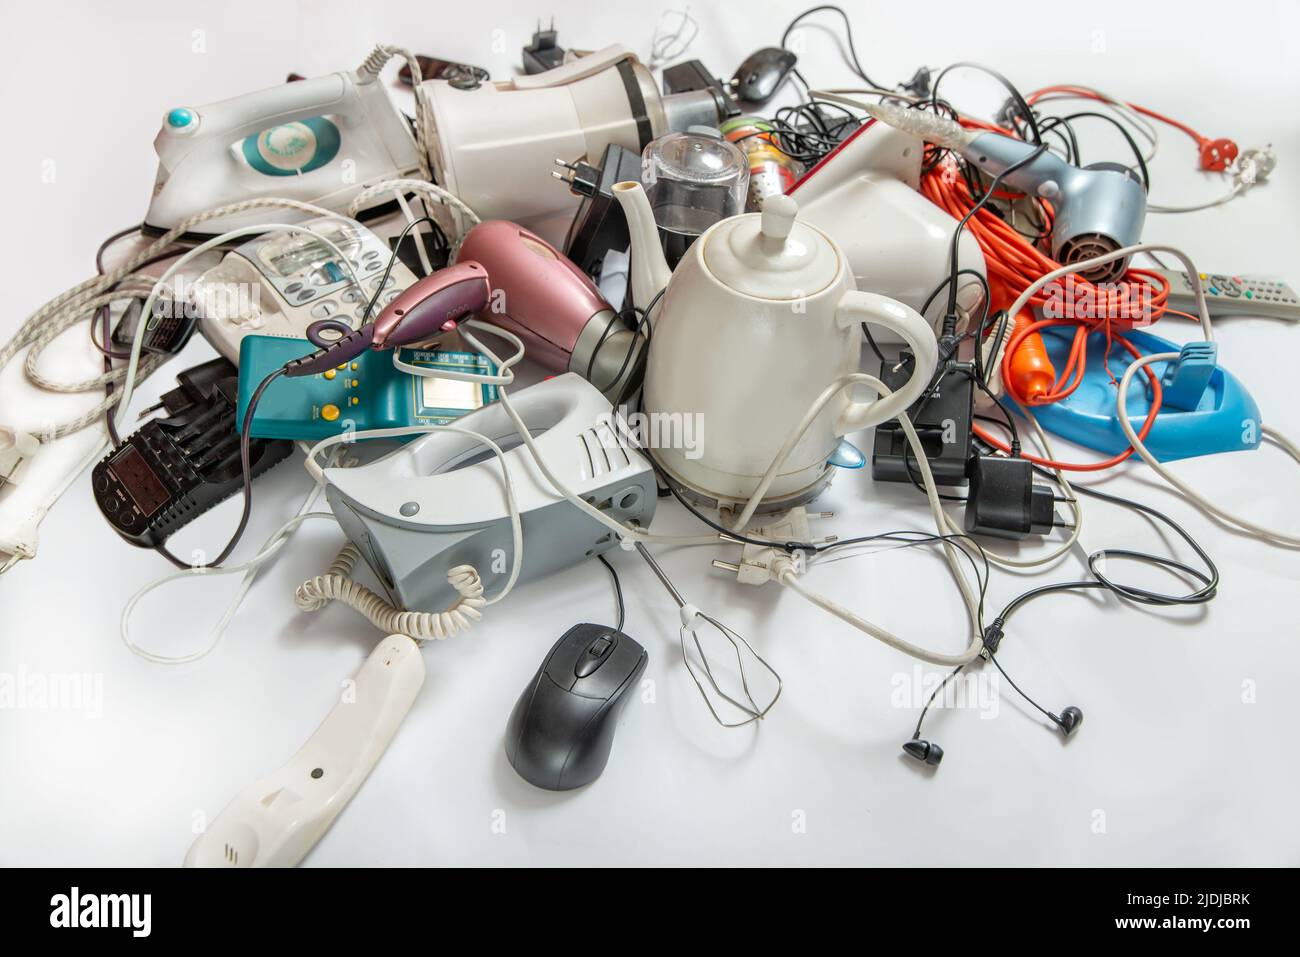 Lots of old electrical appliances for recycling e-waste. Sustainable living concept. Stock Photo